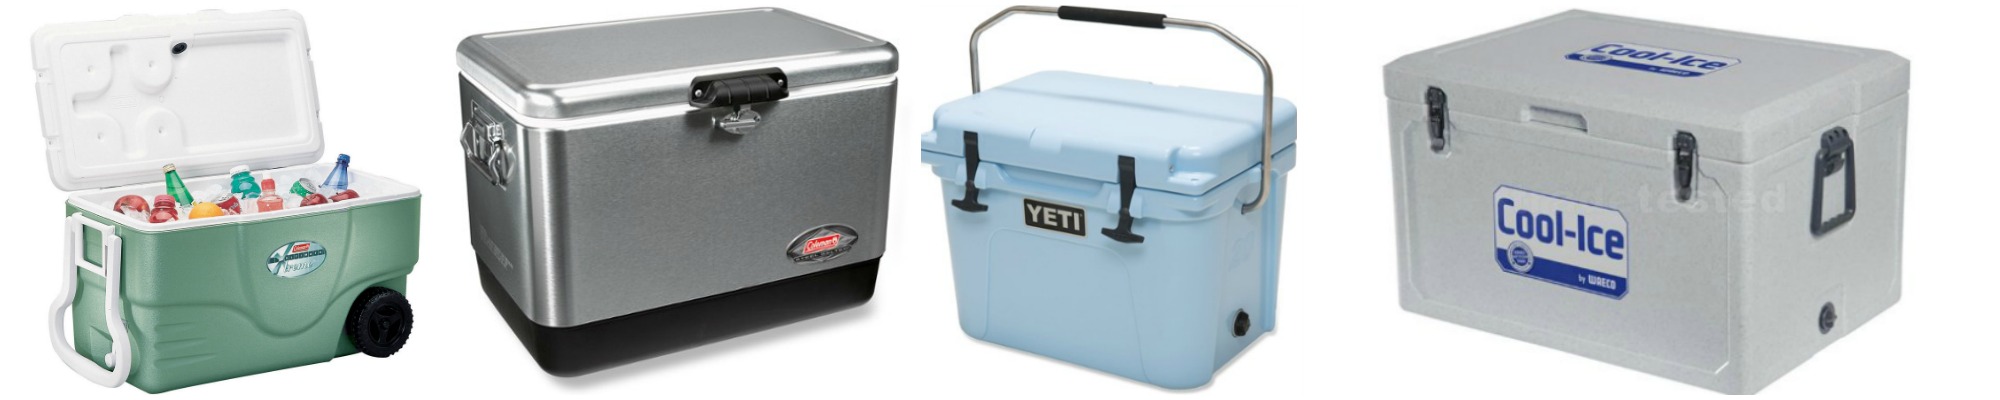 RV Fridges - if your rig doesn't already come with a fridge (or you need to replace it) then it can be mind boggling trying to figure out what your options are and which type would be best for you (and your budget!).